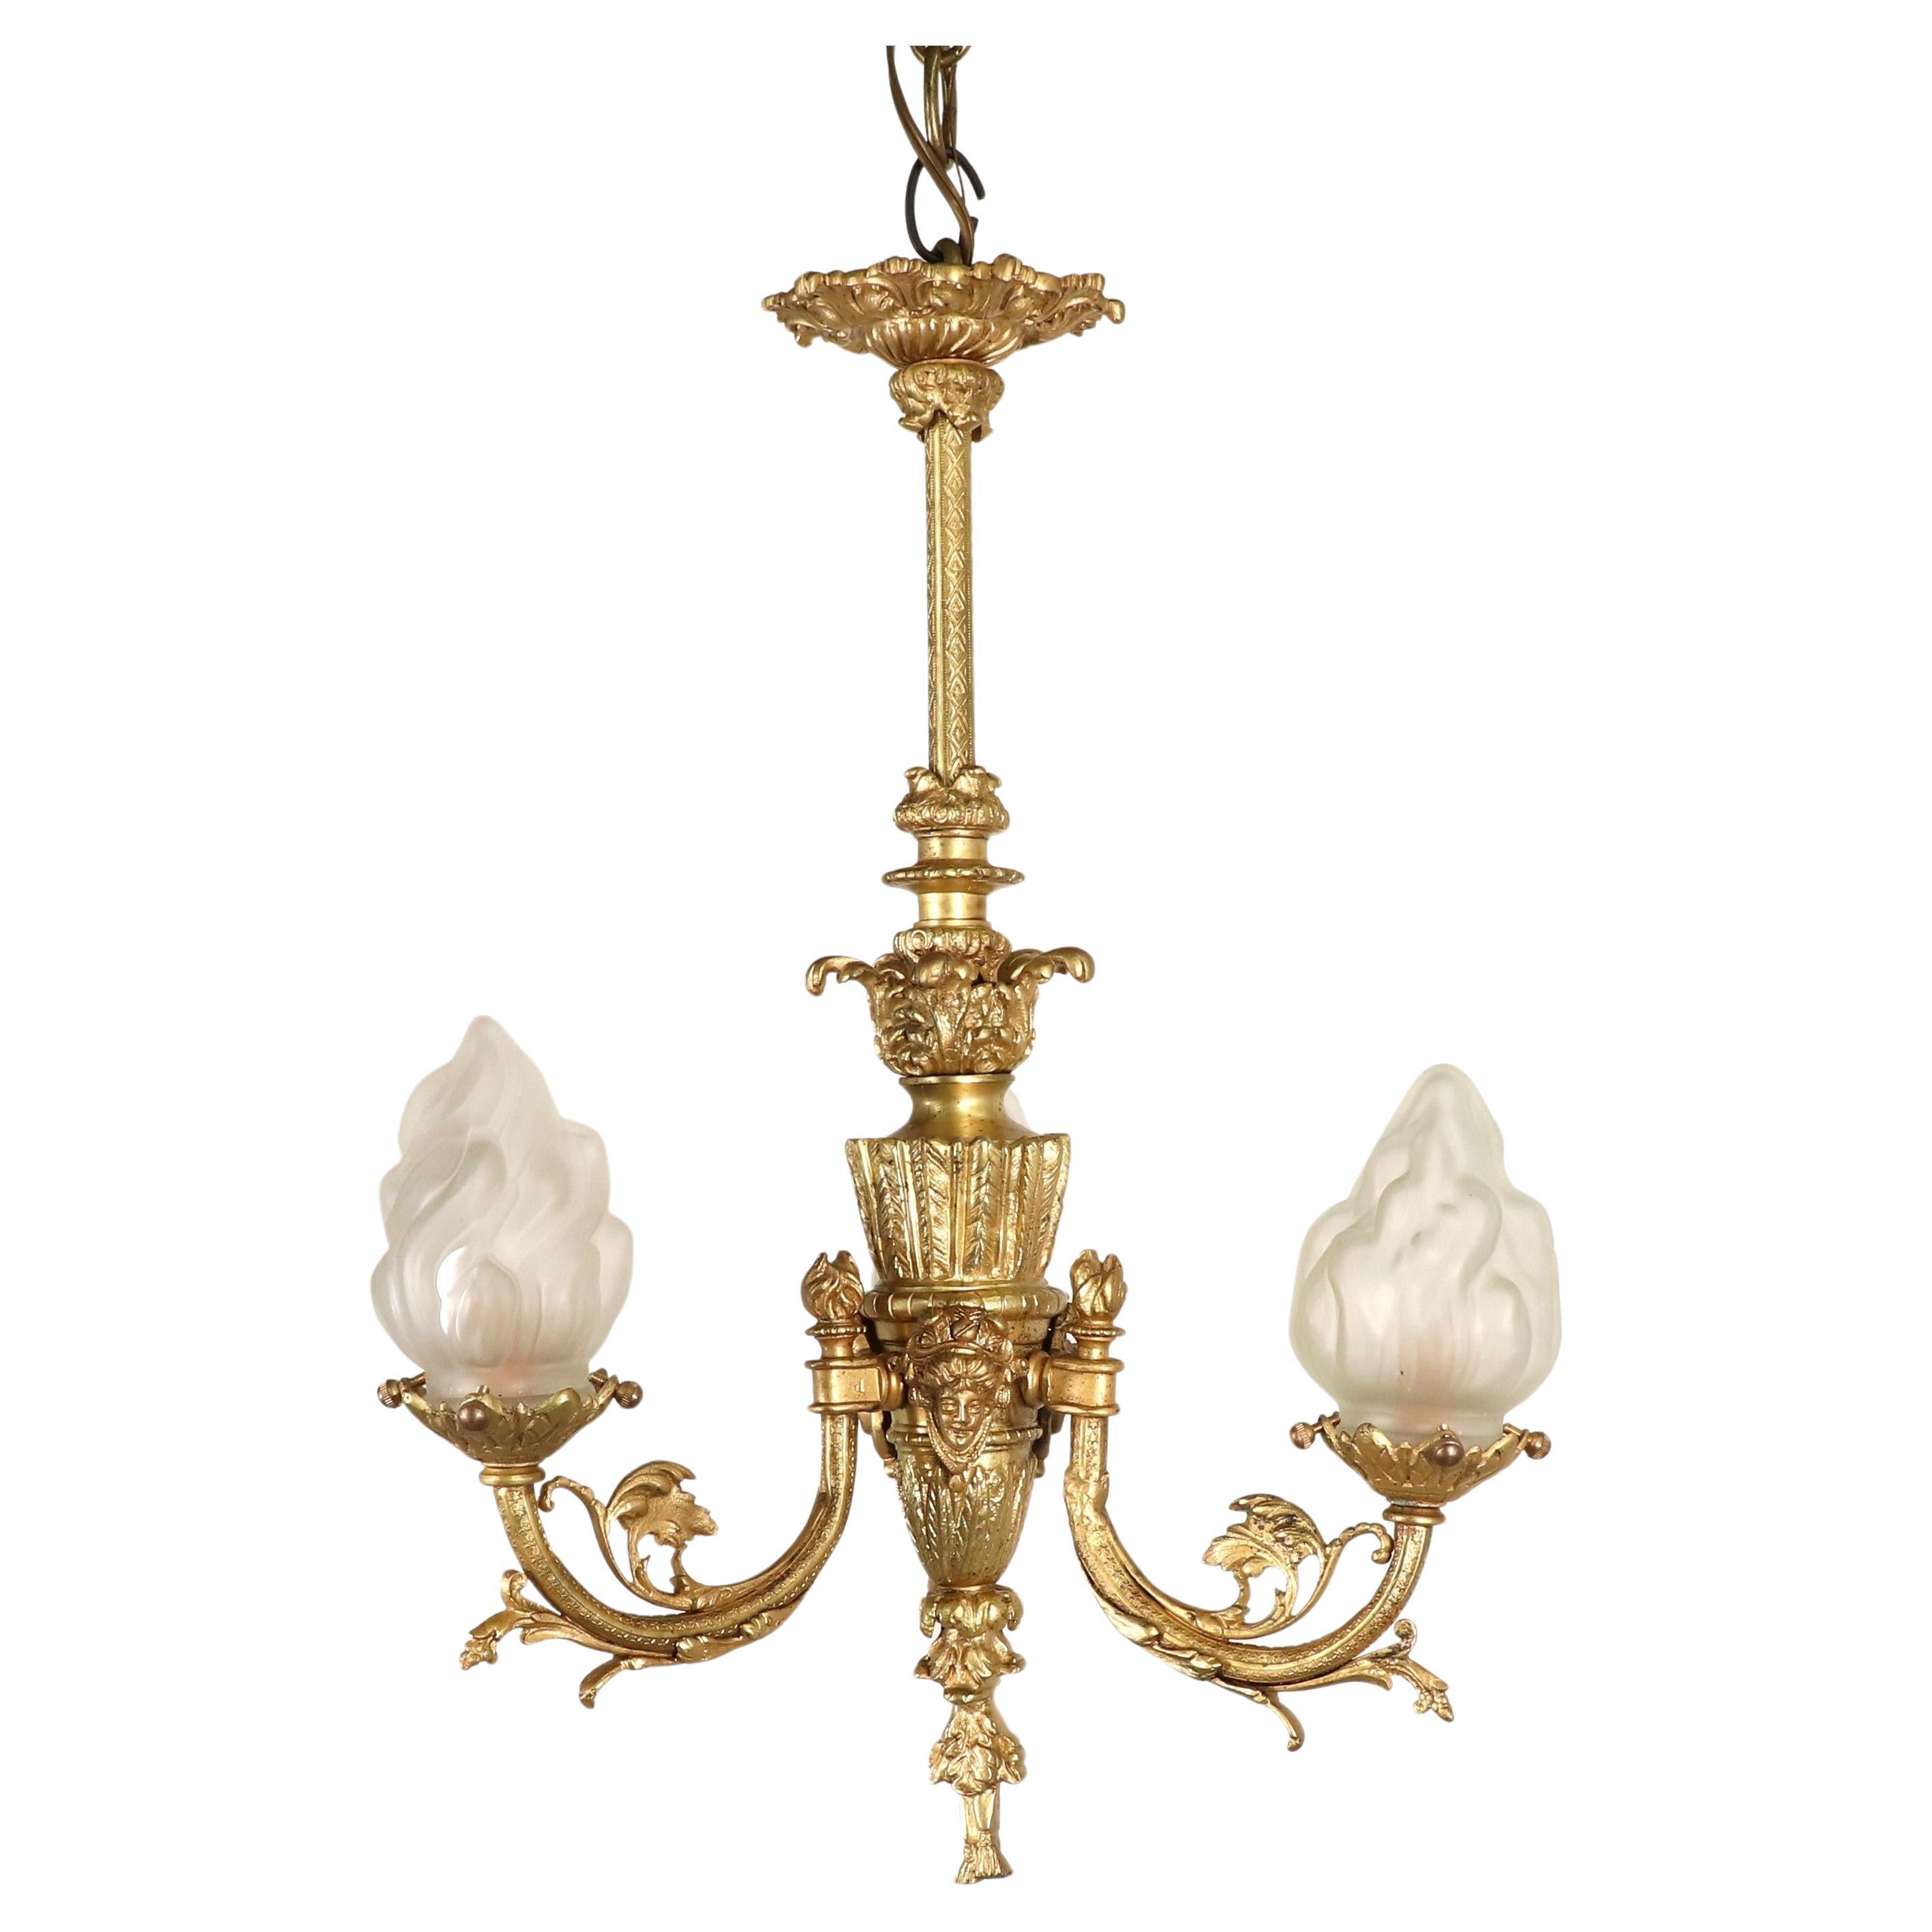 19th Century French Louis XVI Style Yellow Gold Gilt Bronze Flambeau Chandelier For Sale